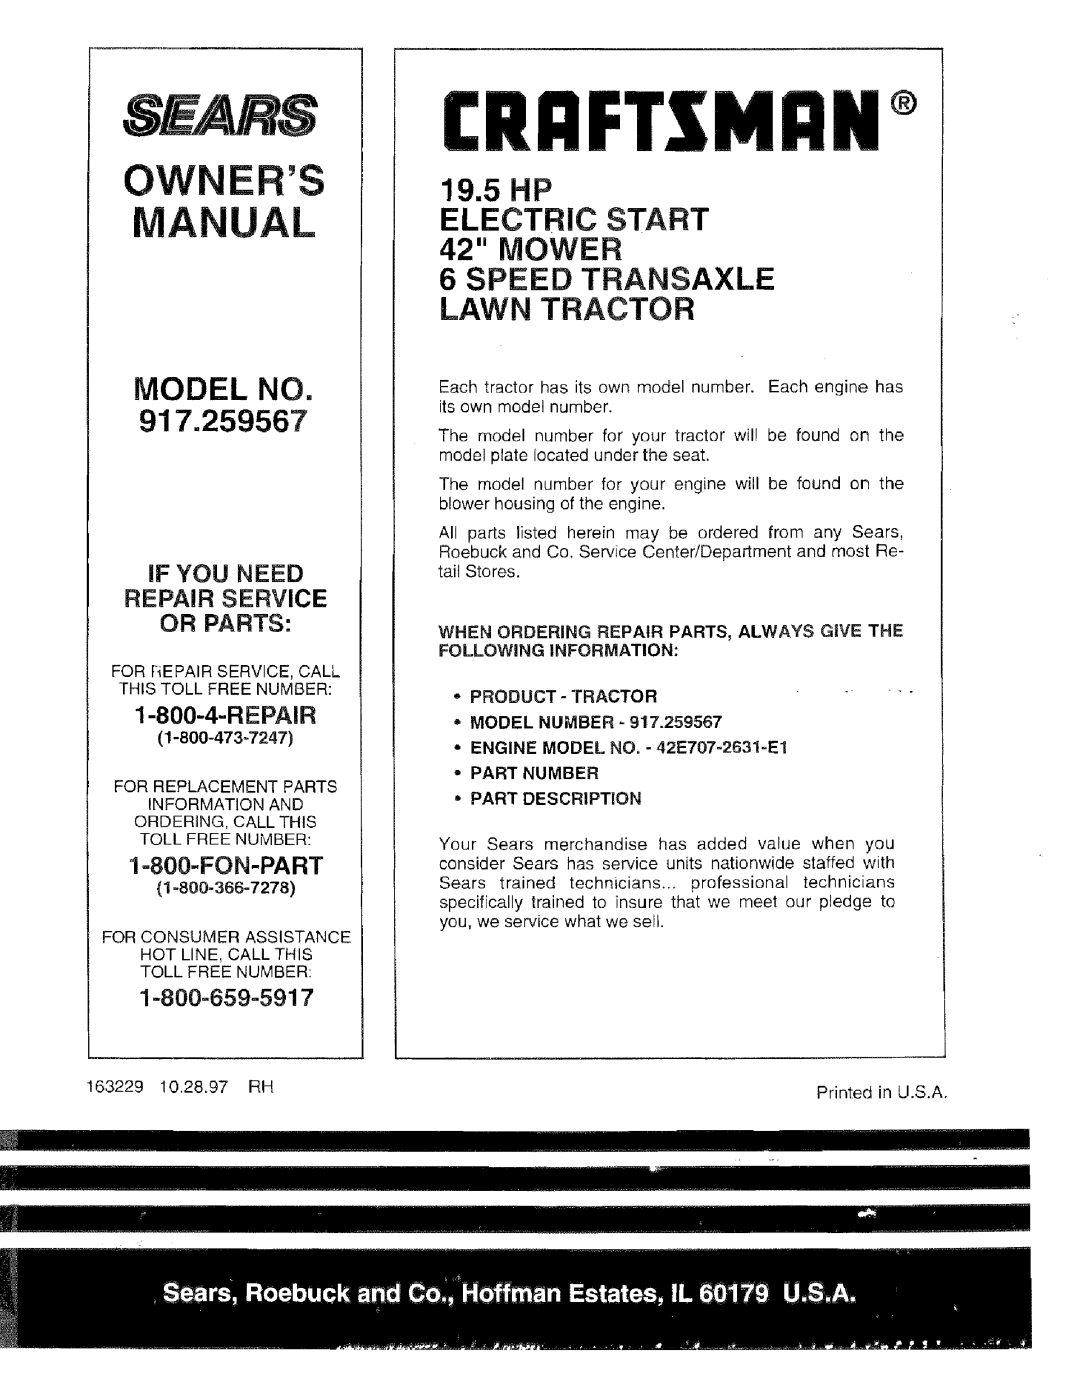 Sears 917.259567 Ers Manual, Model No, 19.5HP, ELECTRIC START 42 MOWER, Speed Transaxle Lawn Tractor, If You Need, Repair 